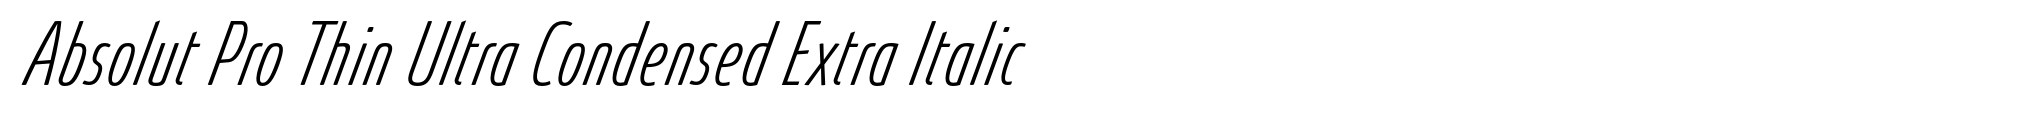 Absolut Pro Thin Ultra Condensed Extra Italic image